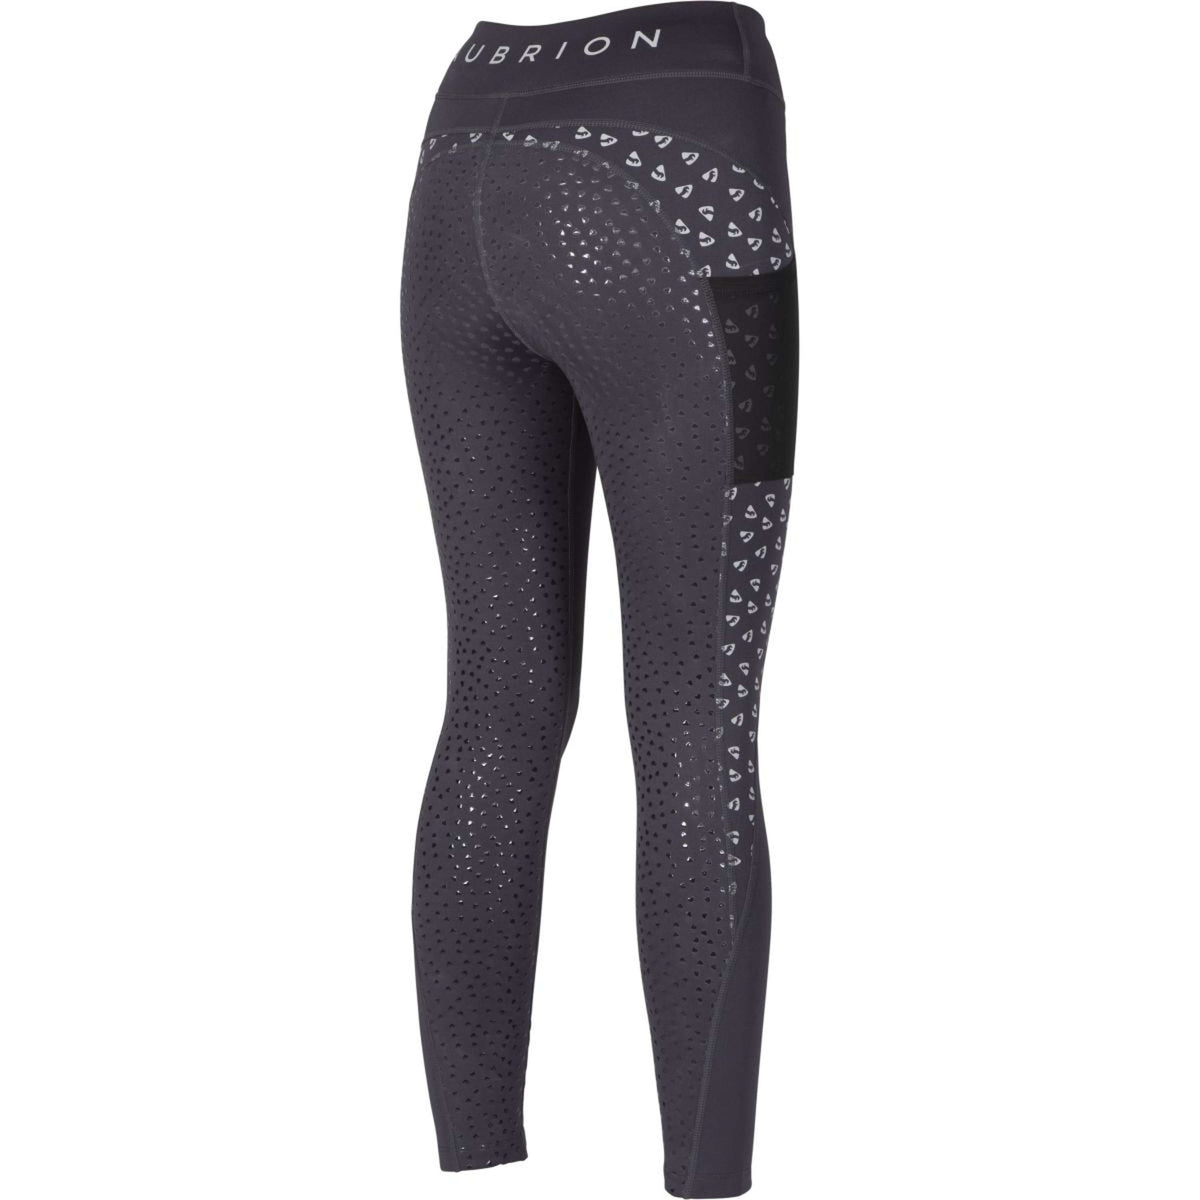 Aubrion by Shires Reitleggings Coombe Mädchen Grau